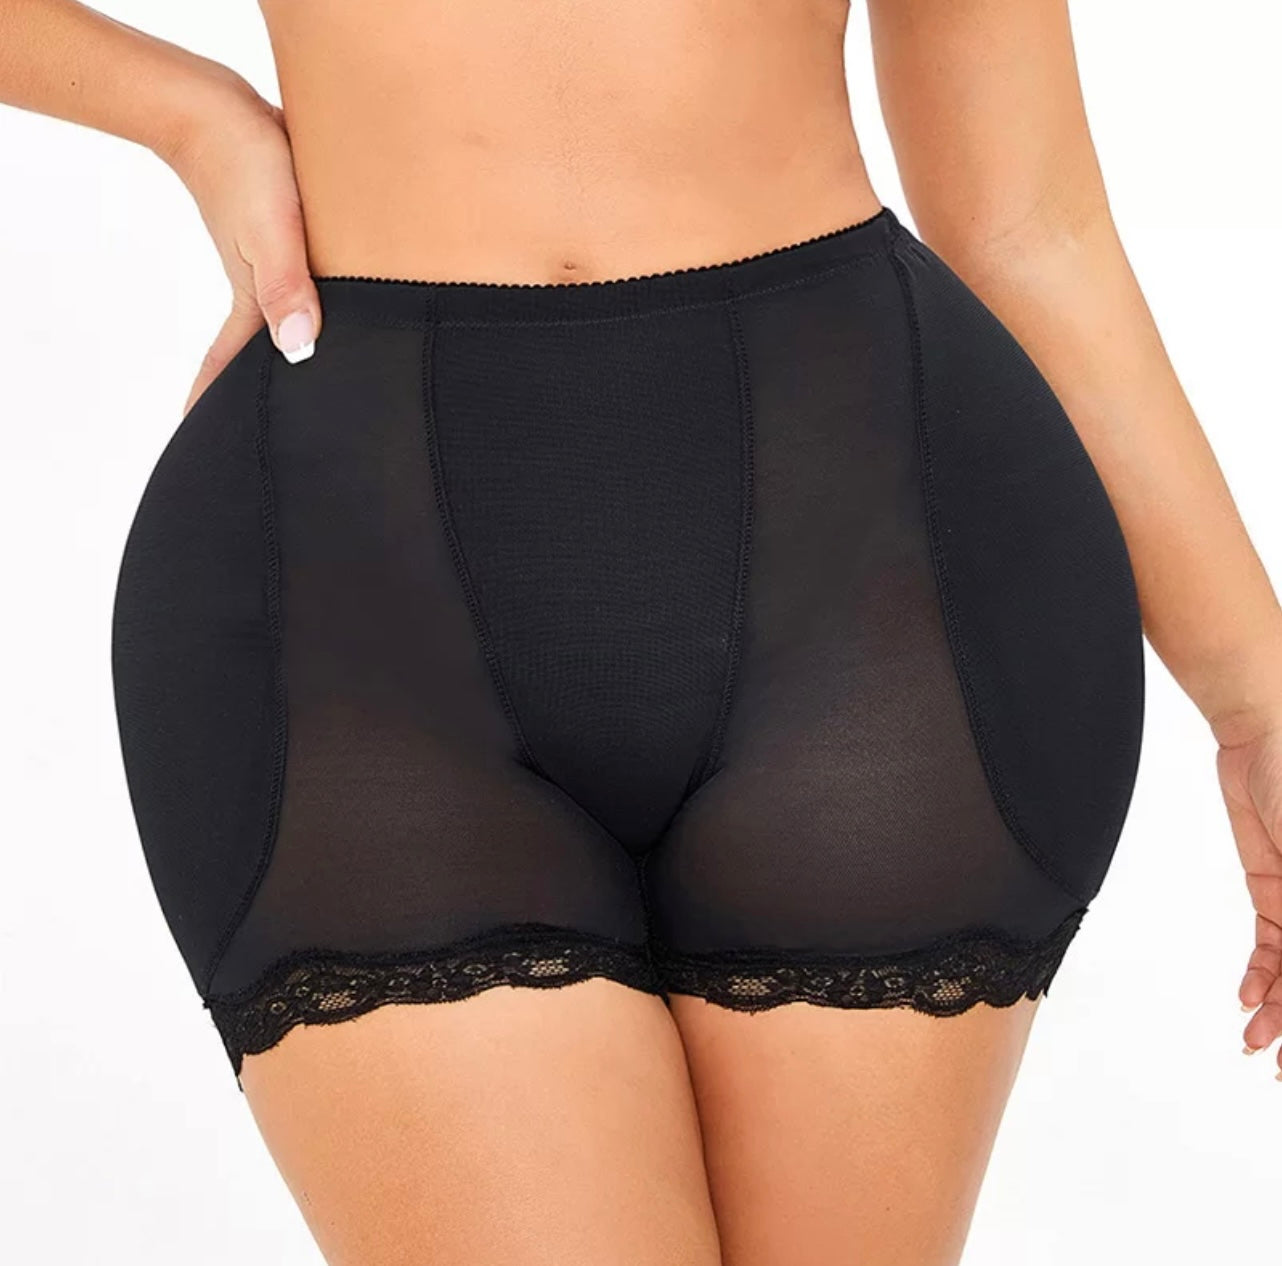 Curve short - 1 (low waist) hip/ butt pad with lace – Official BBL Shapewear